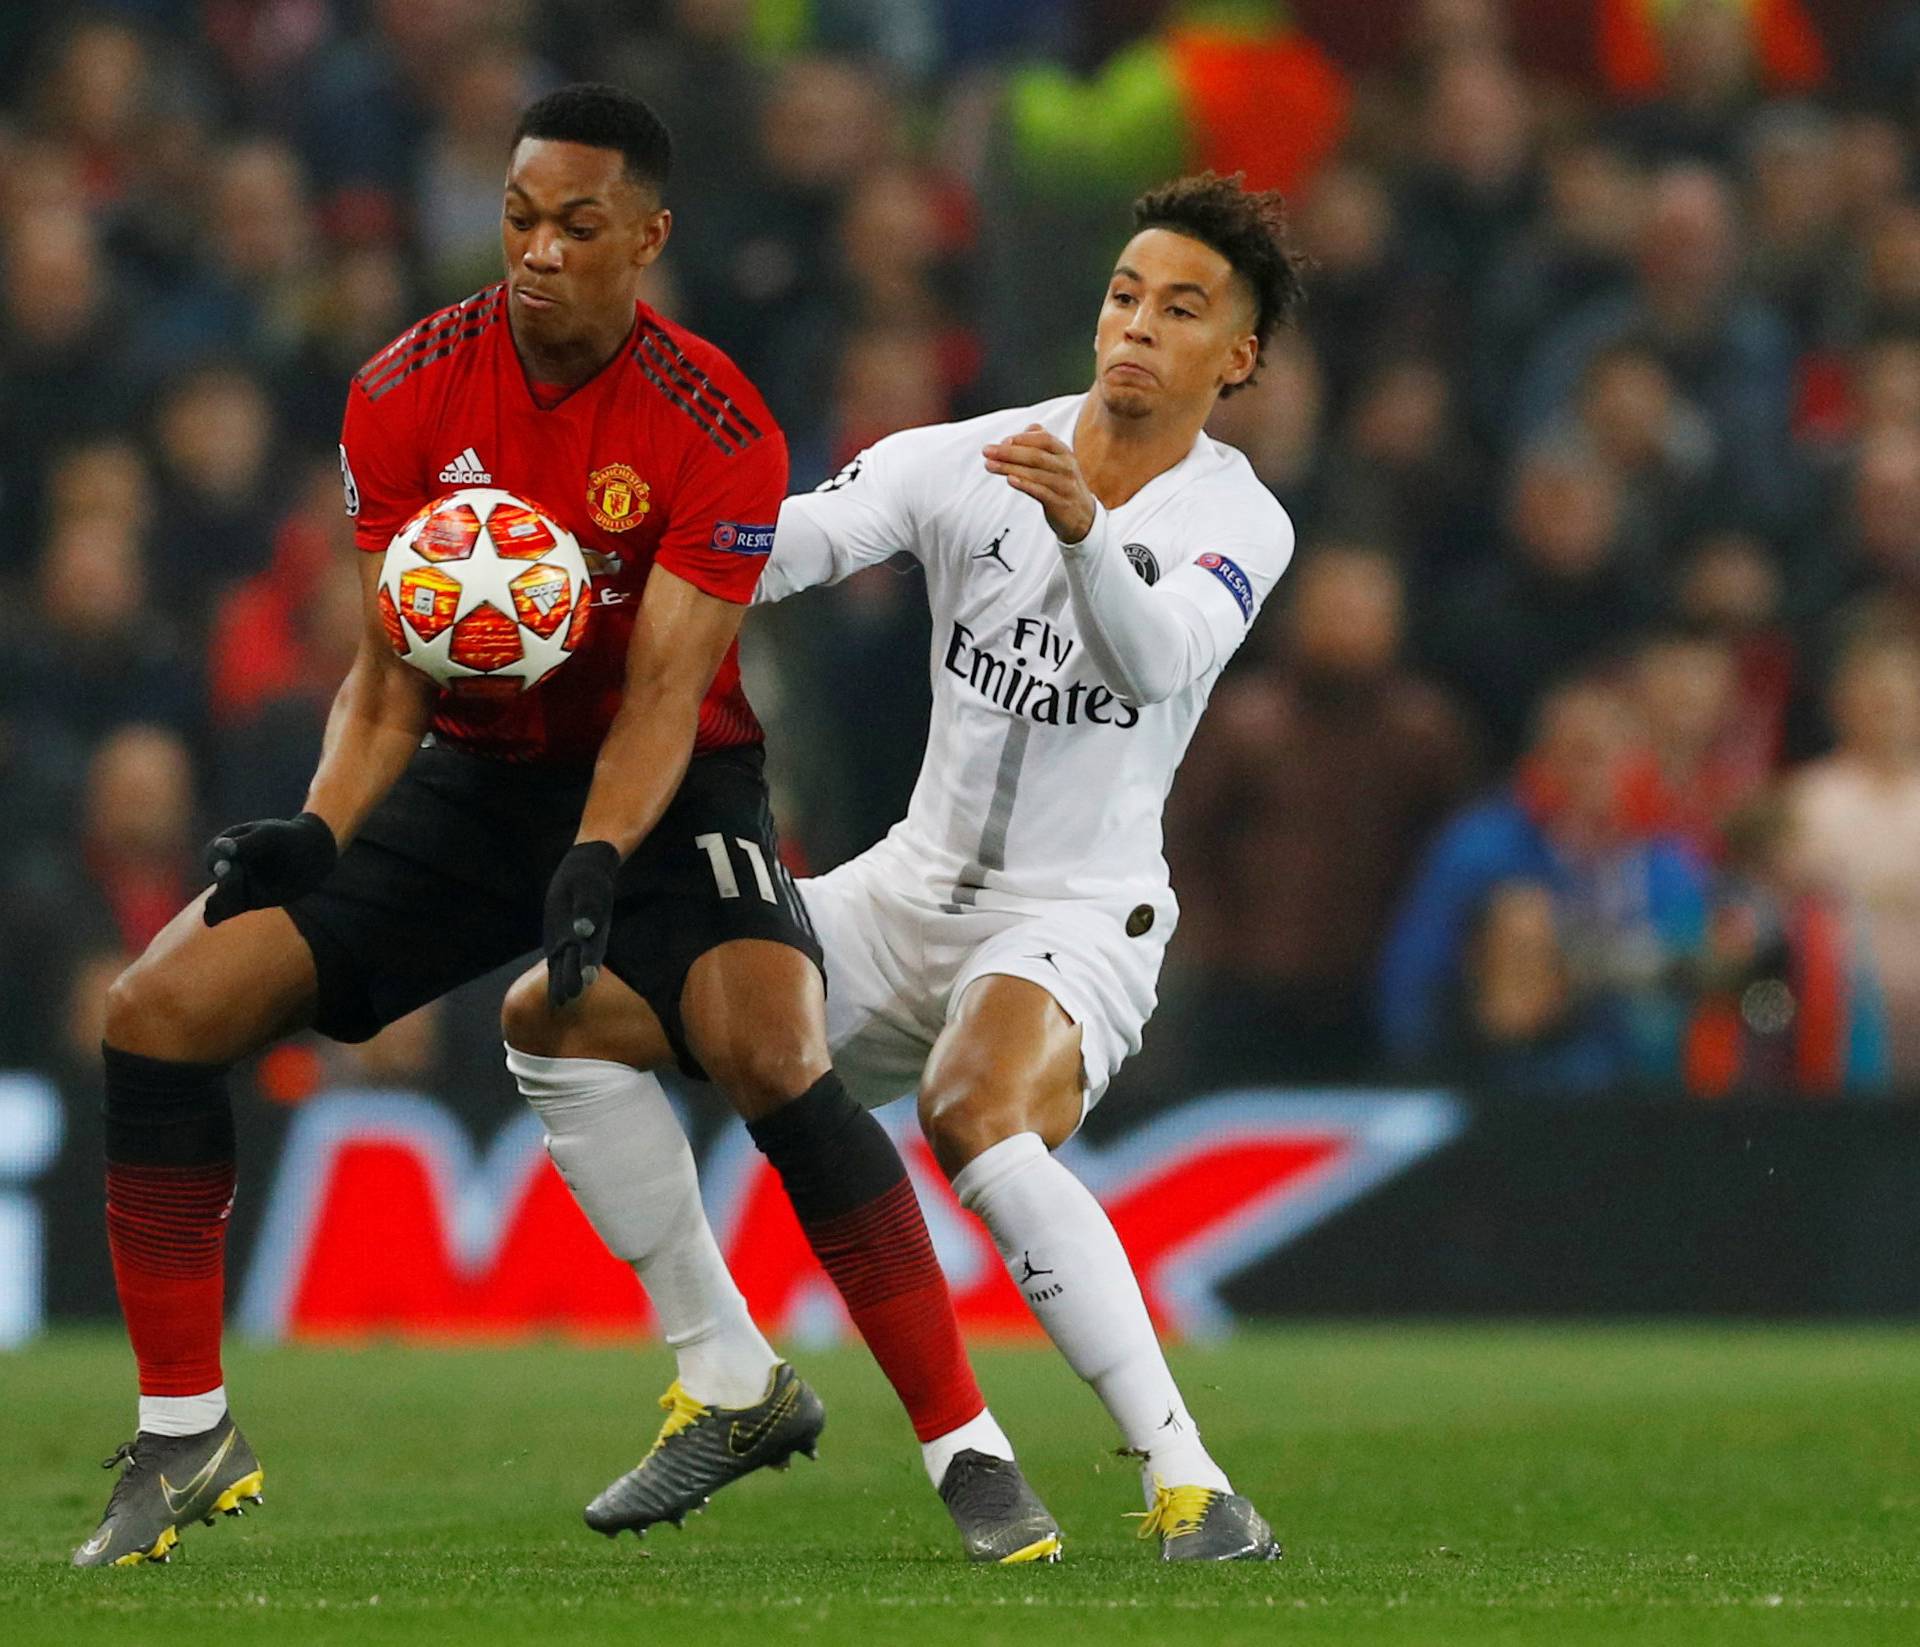 Champions League Round of 16 First Leg - Manchester United v Paris St Germain